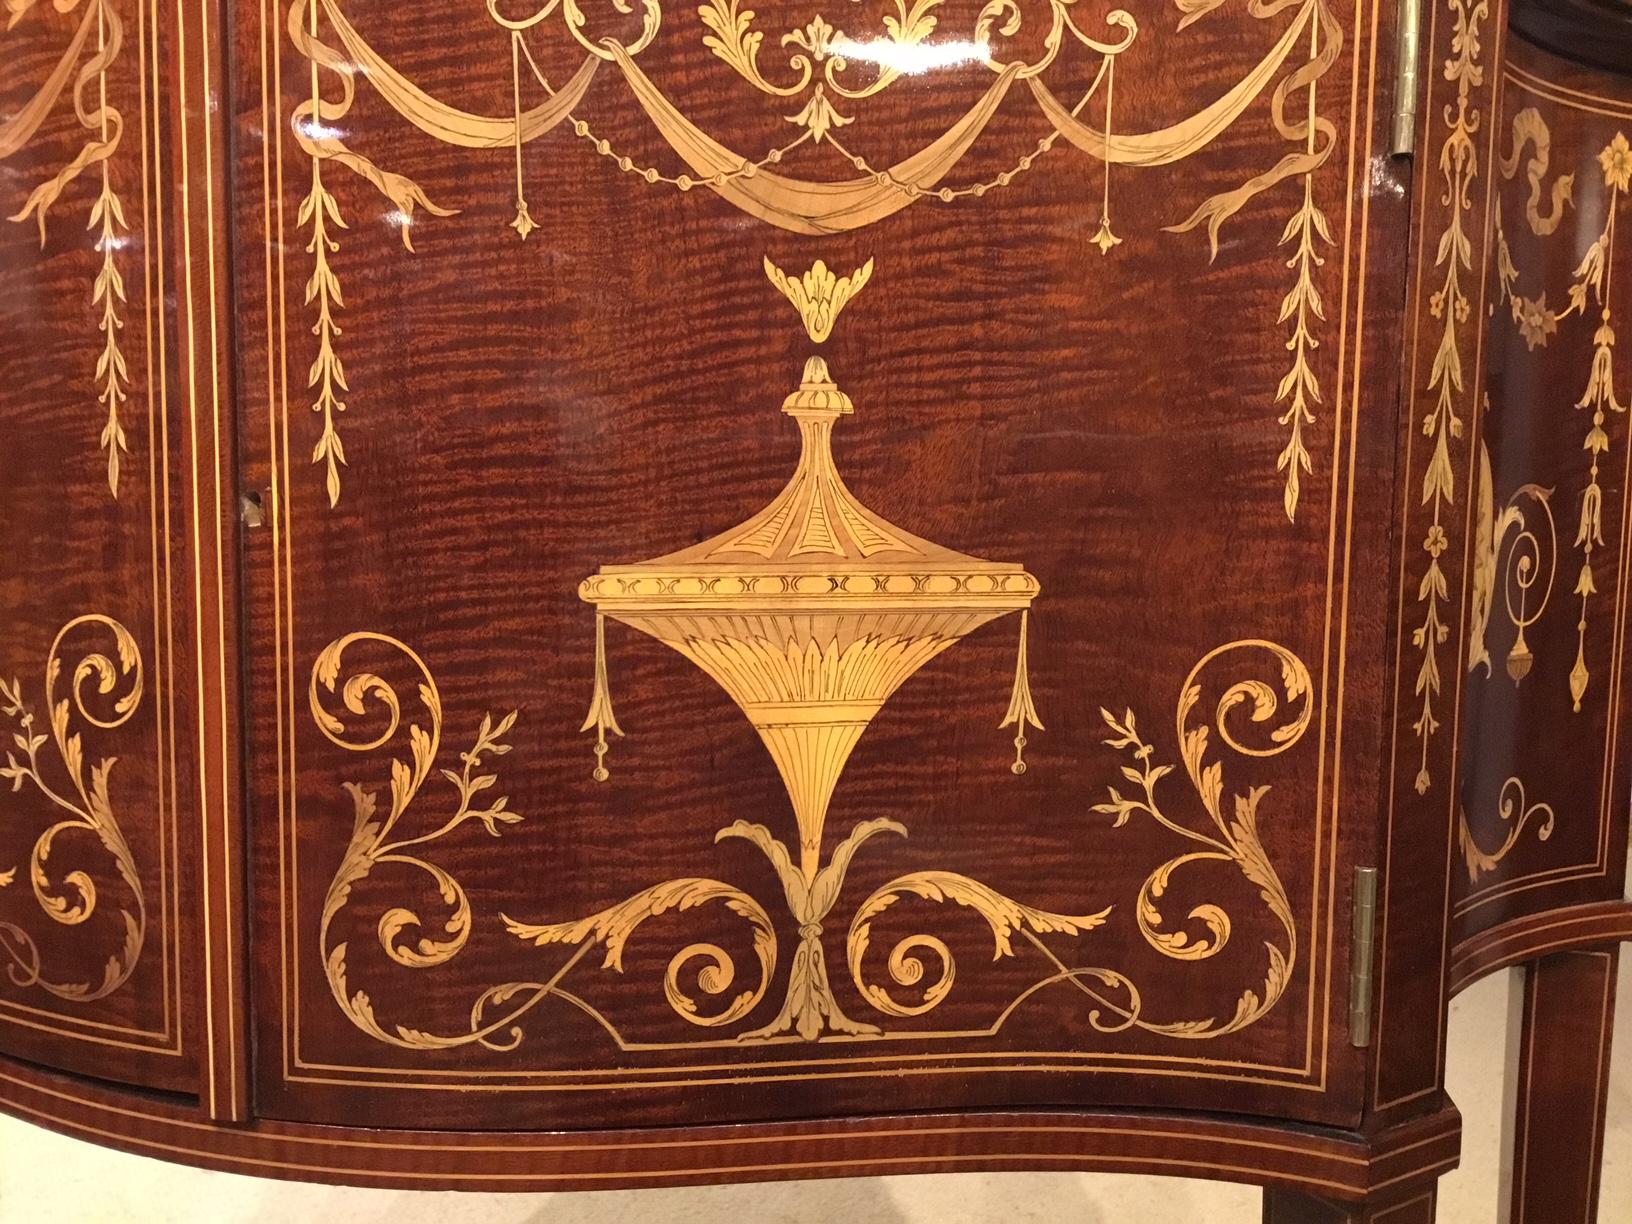  Marquetry Inlaid Edwardian Period Serpentine Cabinet by Maple 2